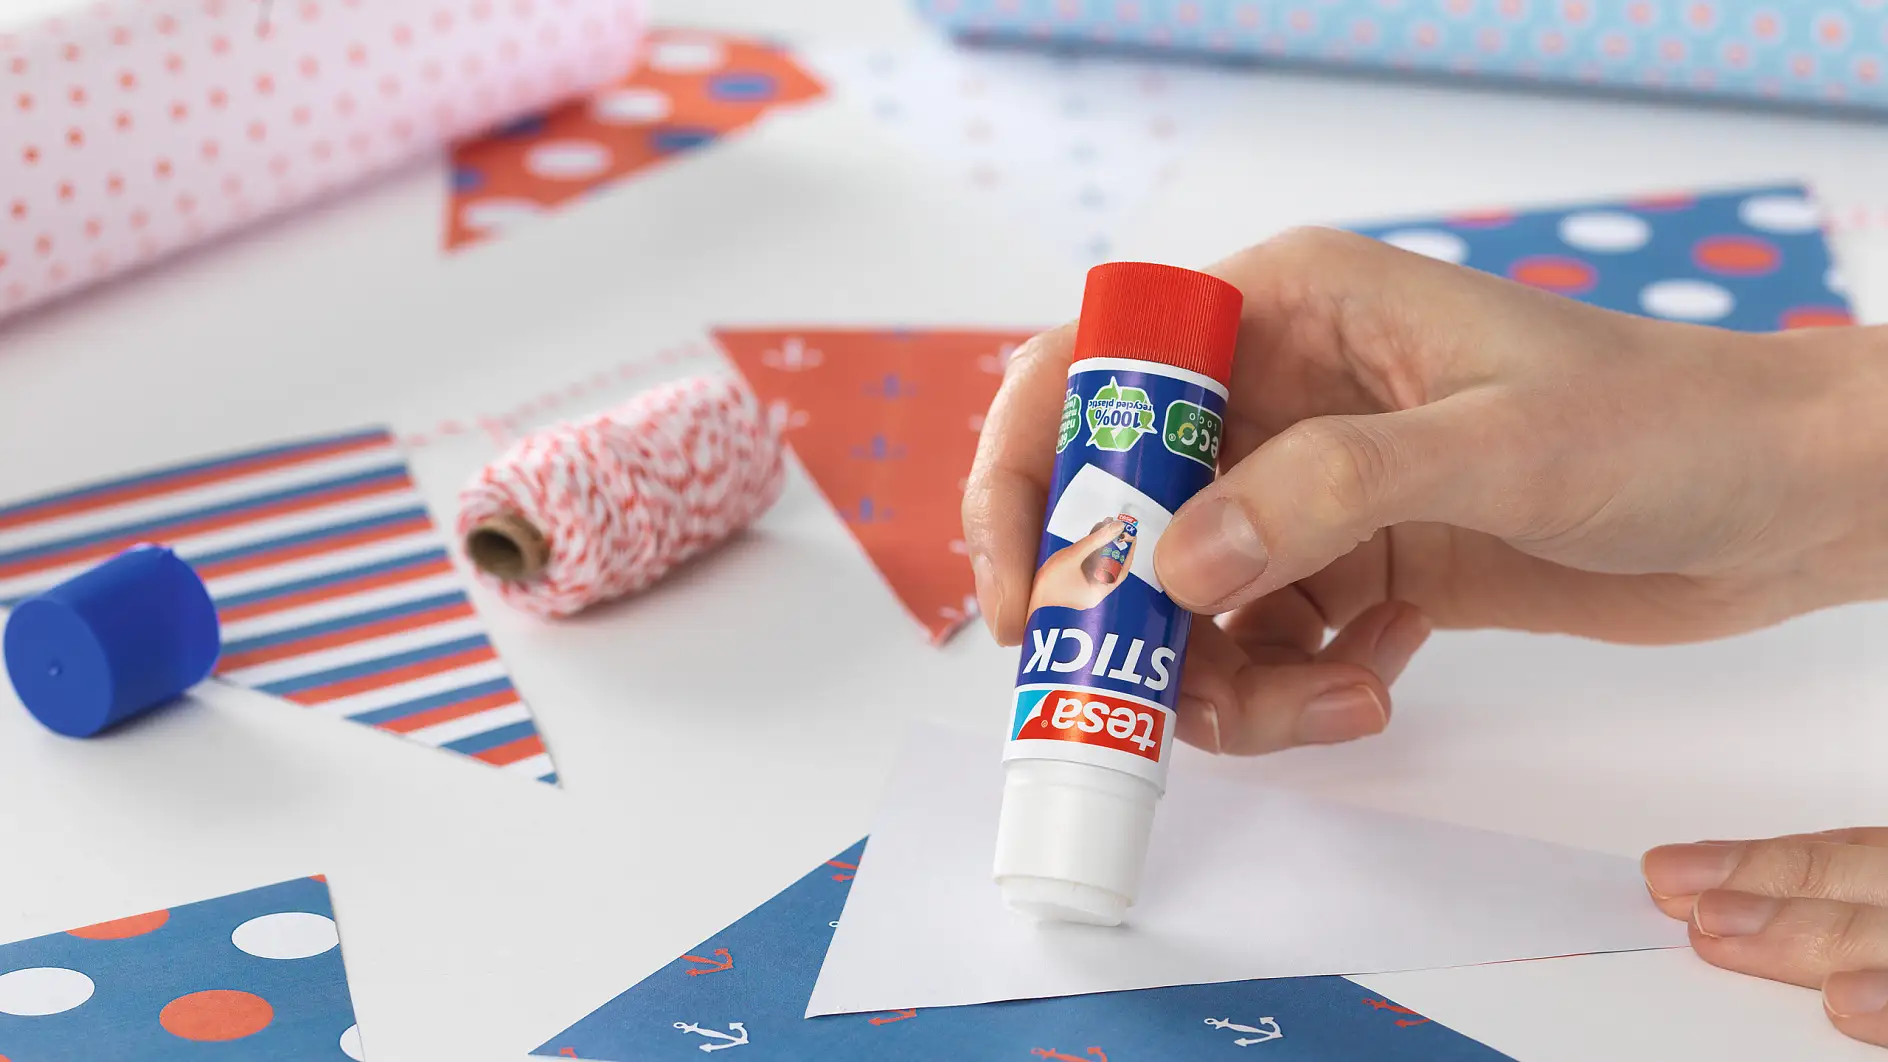 Glue sticks – everyday helpers in home or office